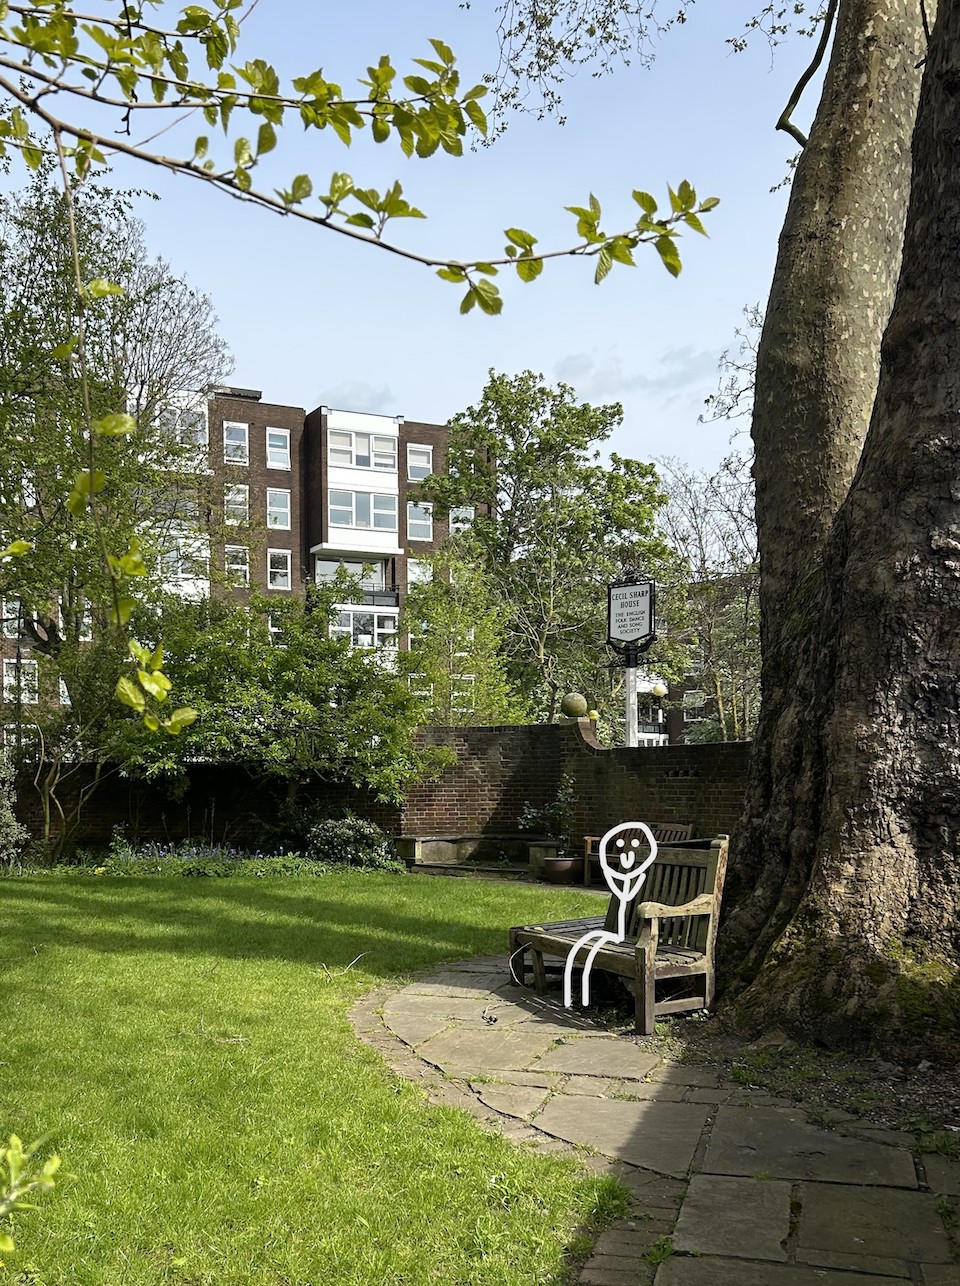 A stick figure sitting on a bench in the garden at Cecil Sharp House